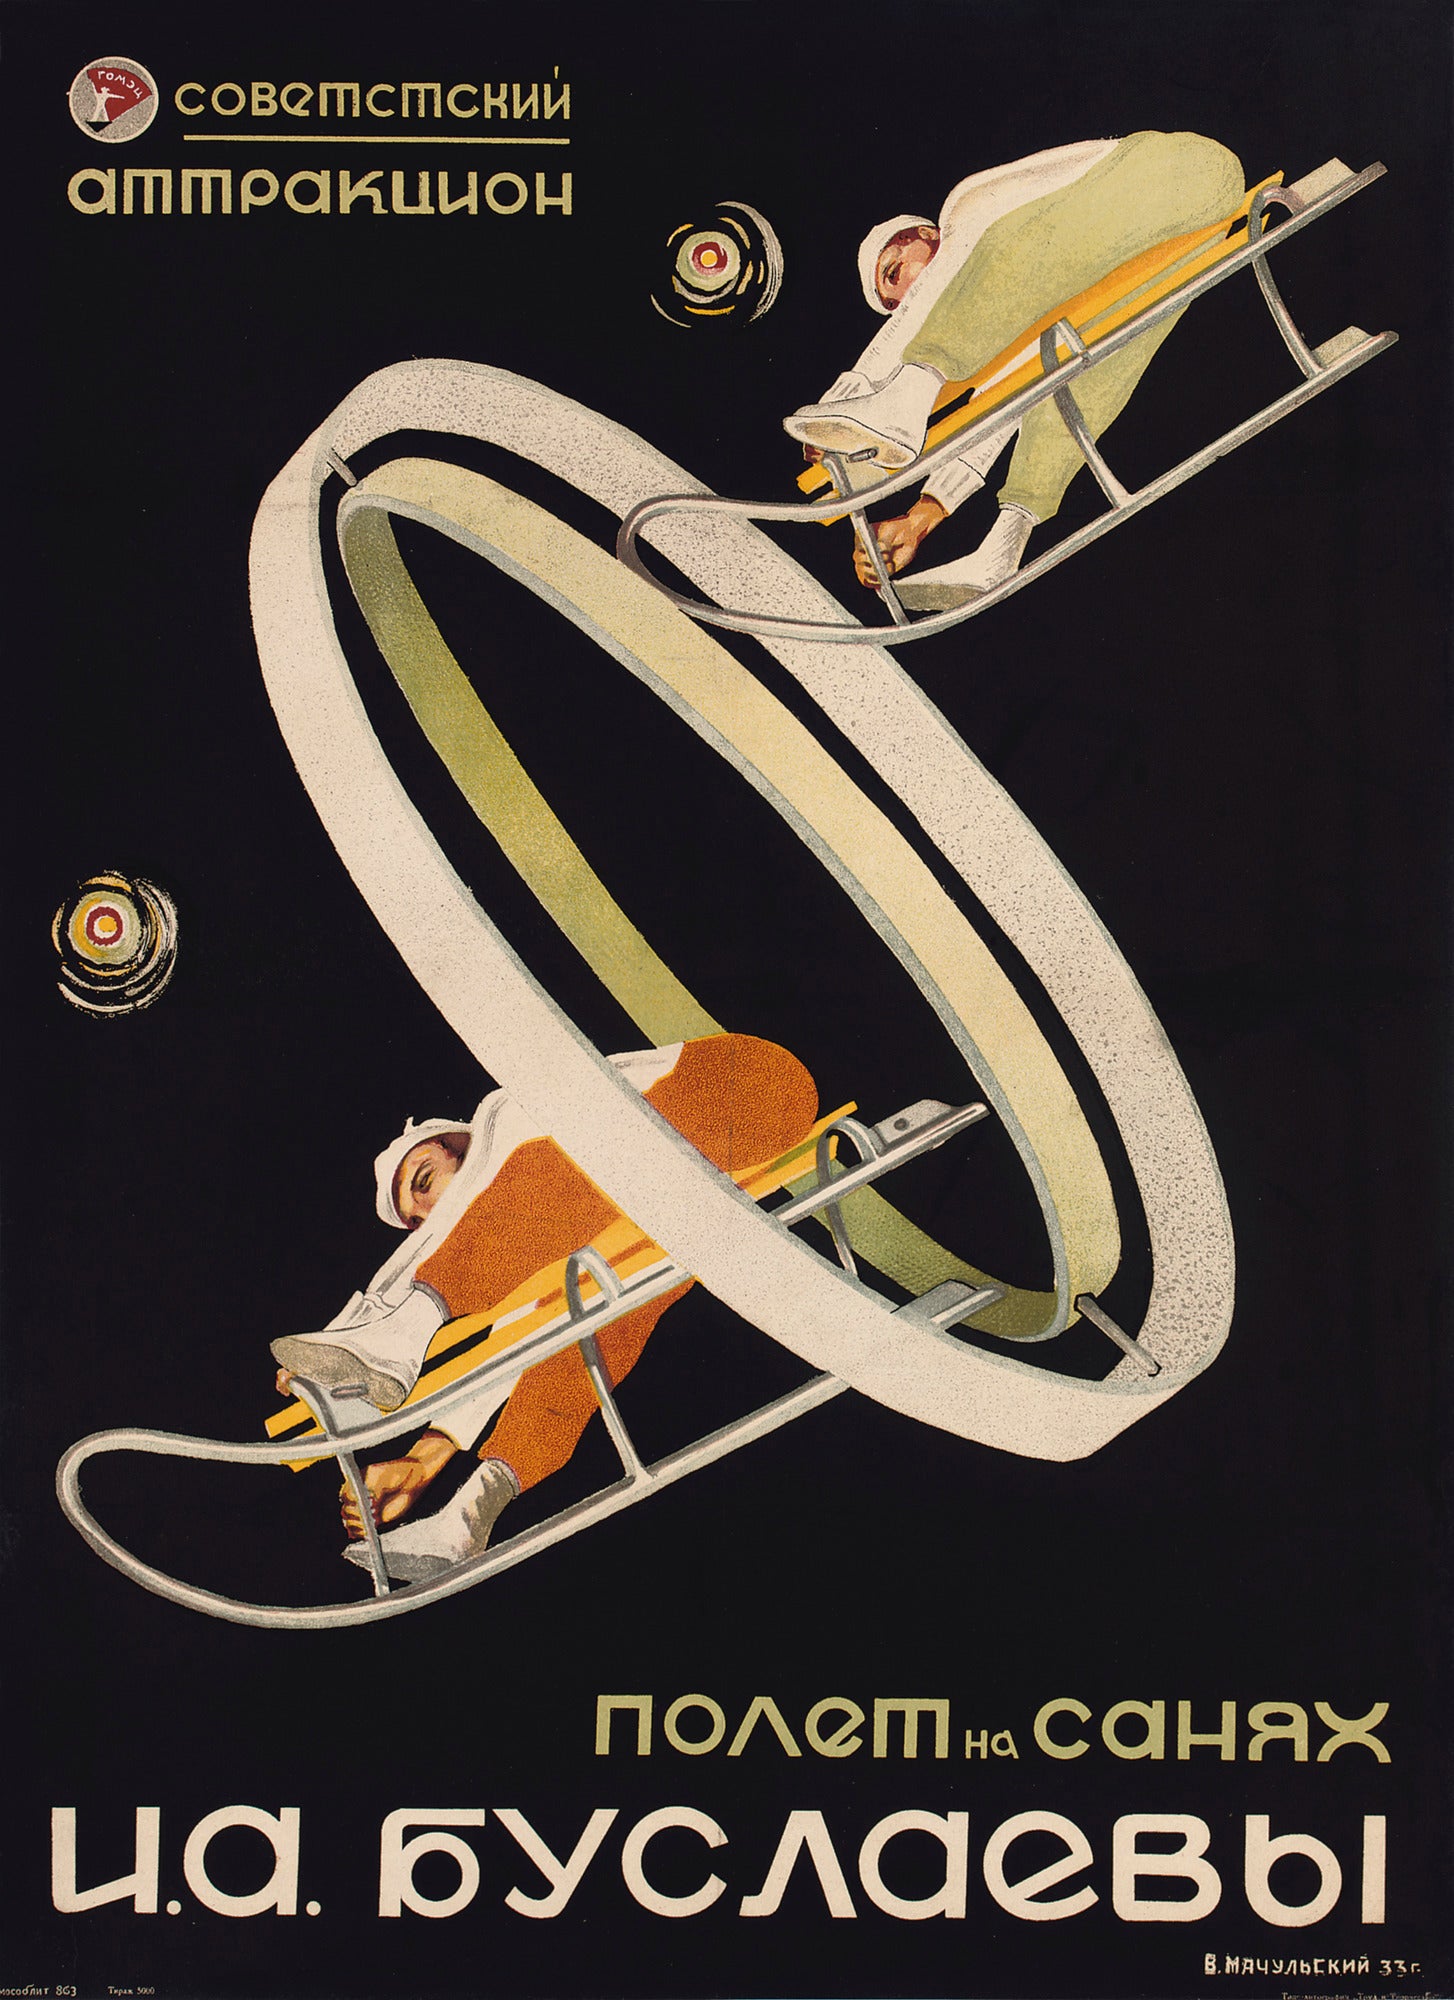 Original Russian Constructivist Design Poster for a Circus Act, Flying Sledges